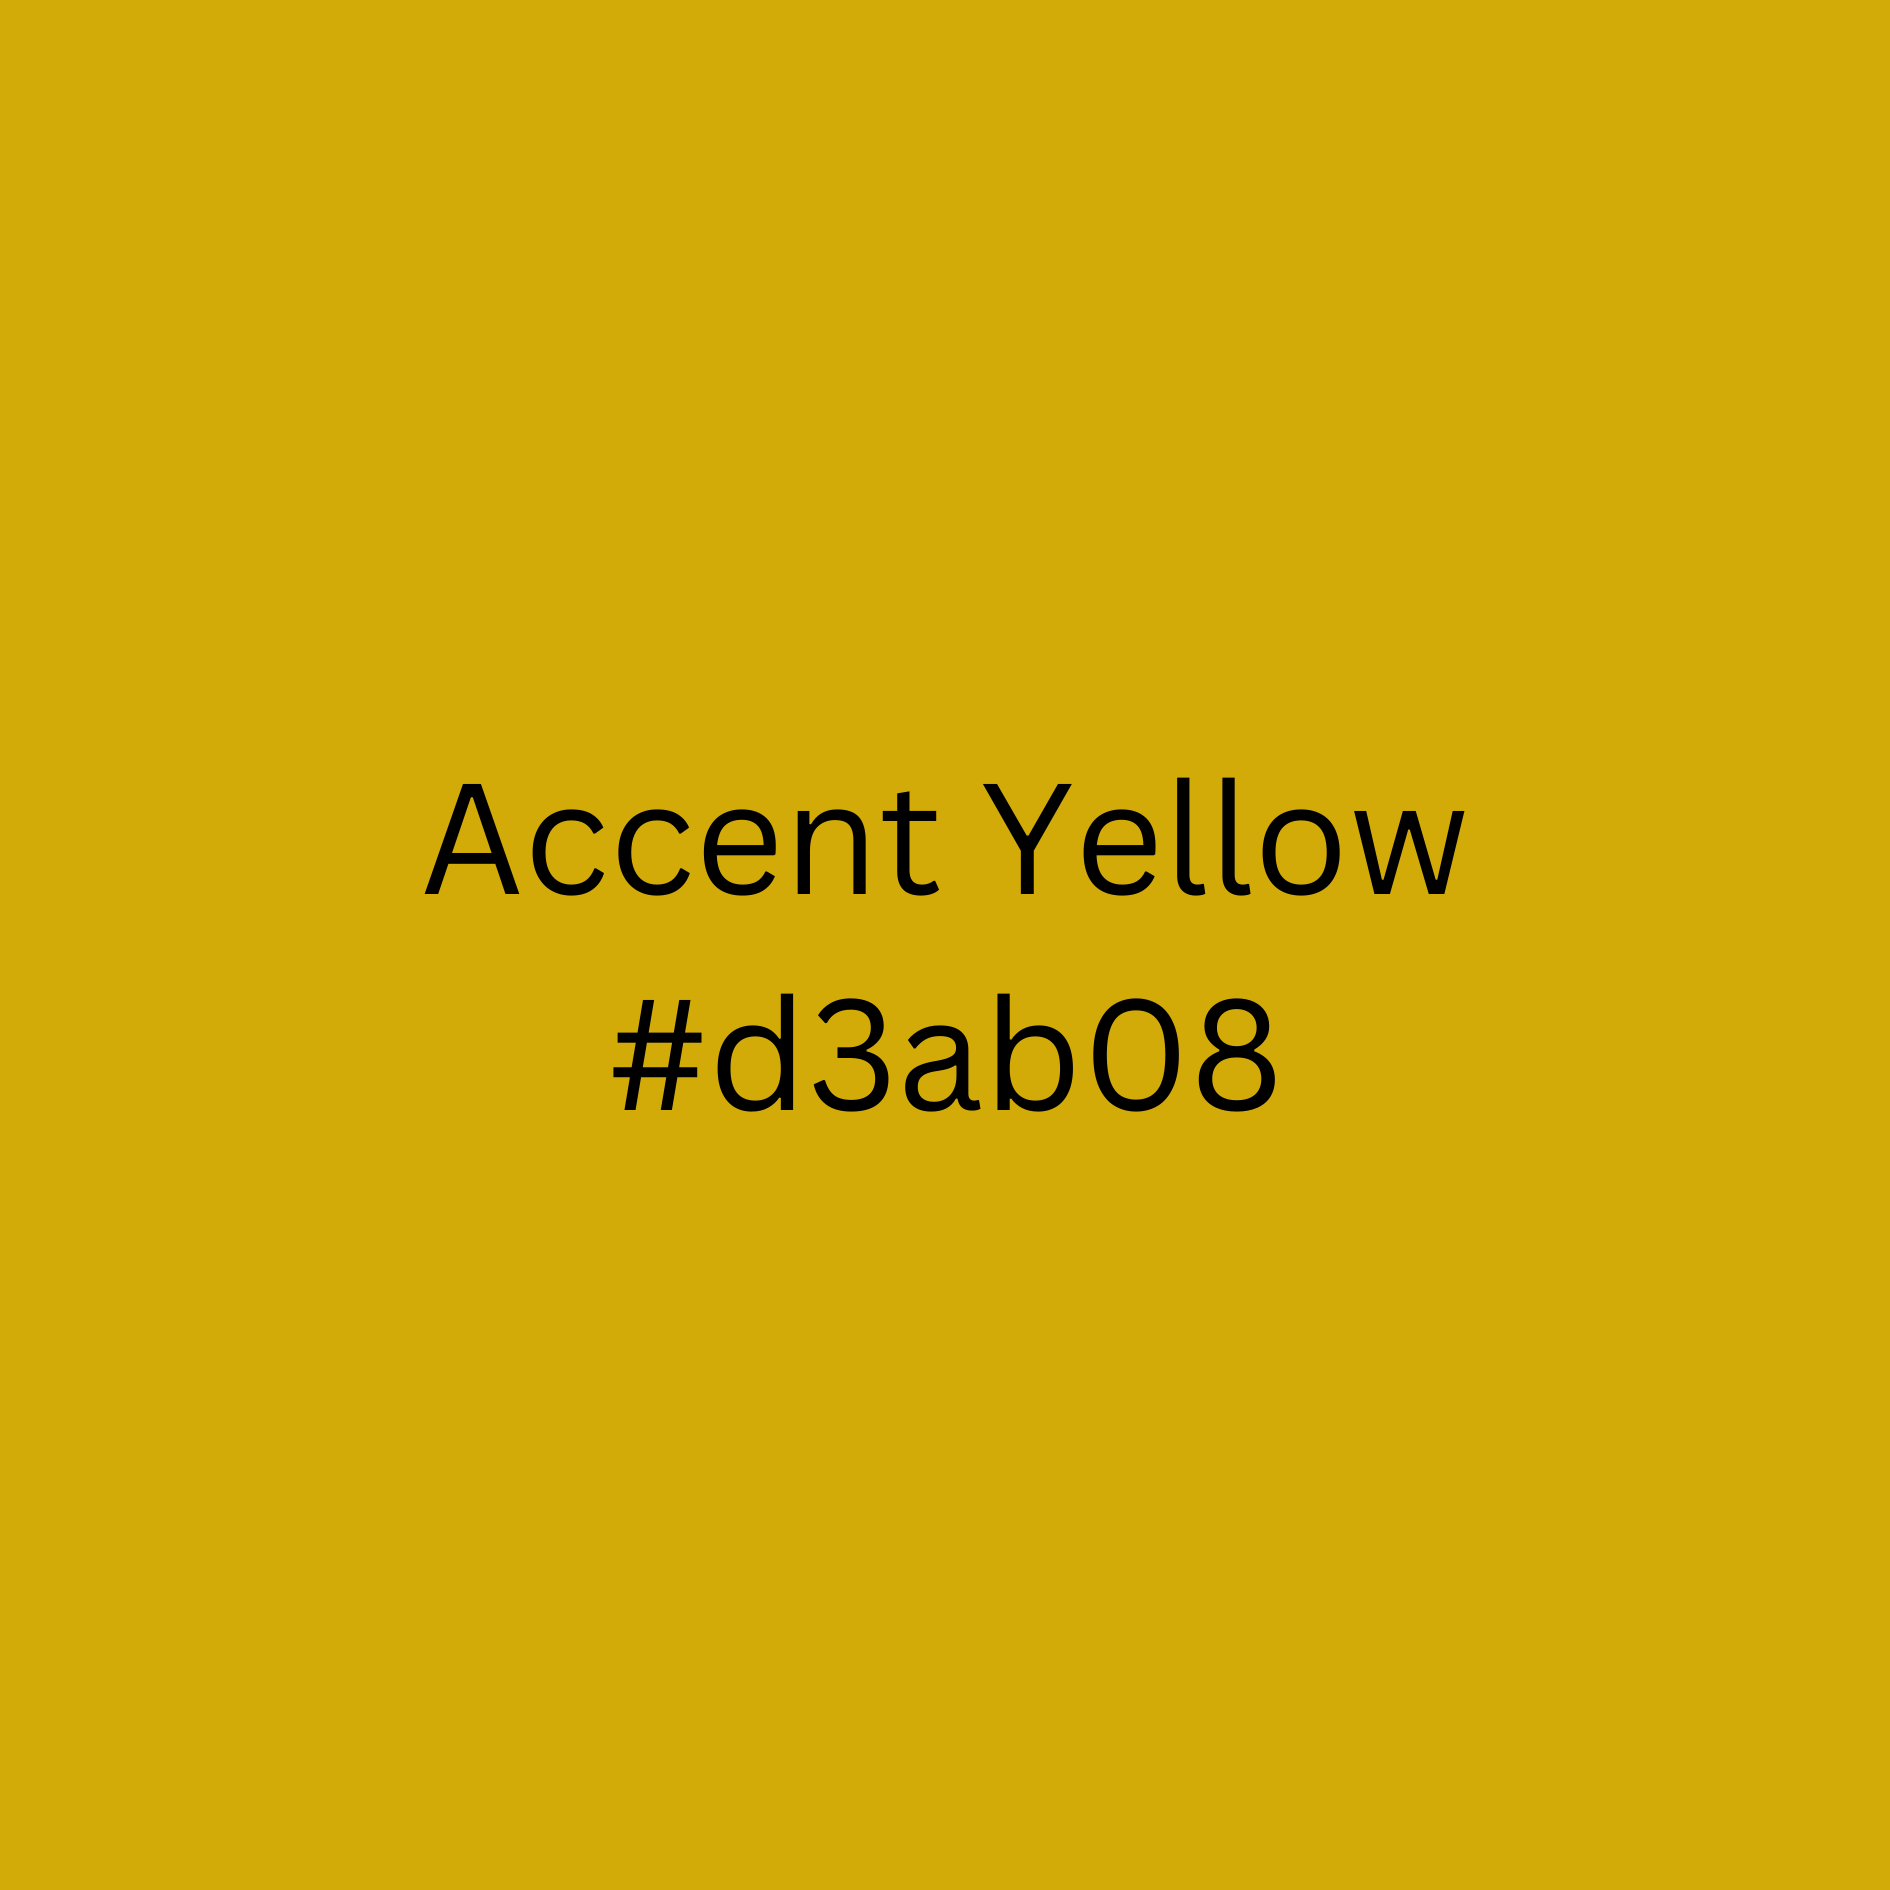 Accent Yellow Used Throughout Website